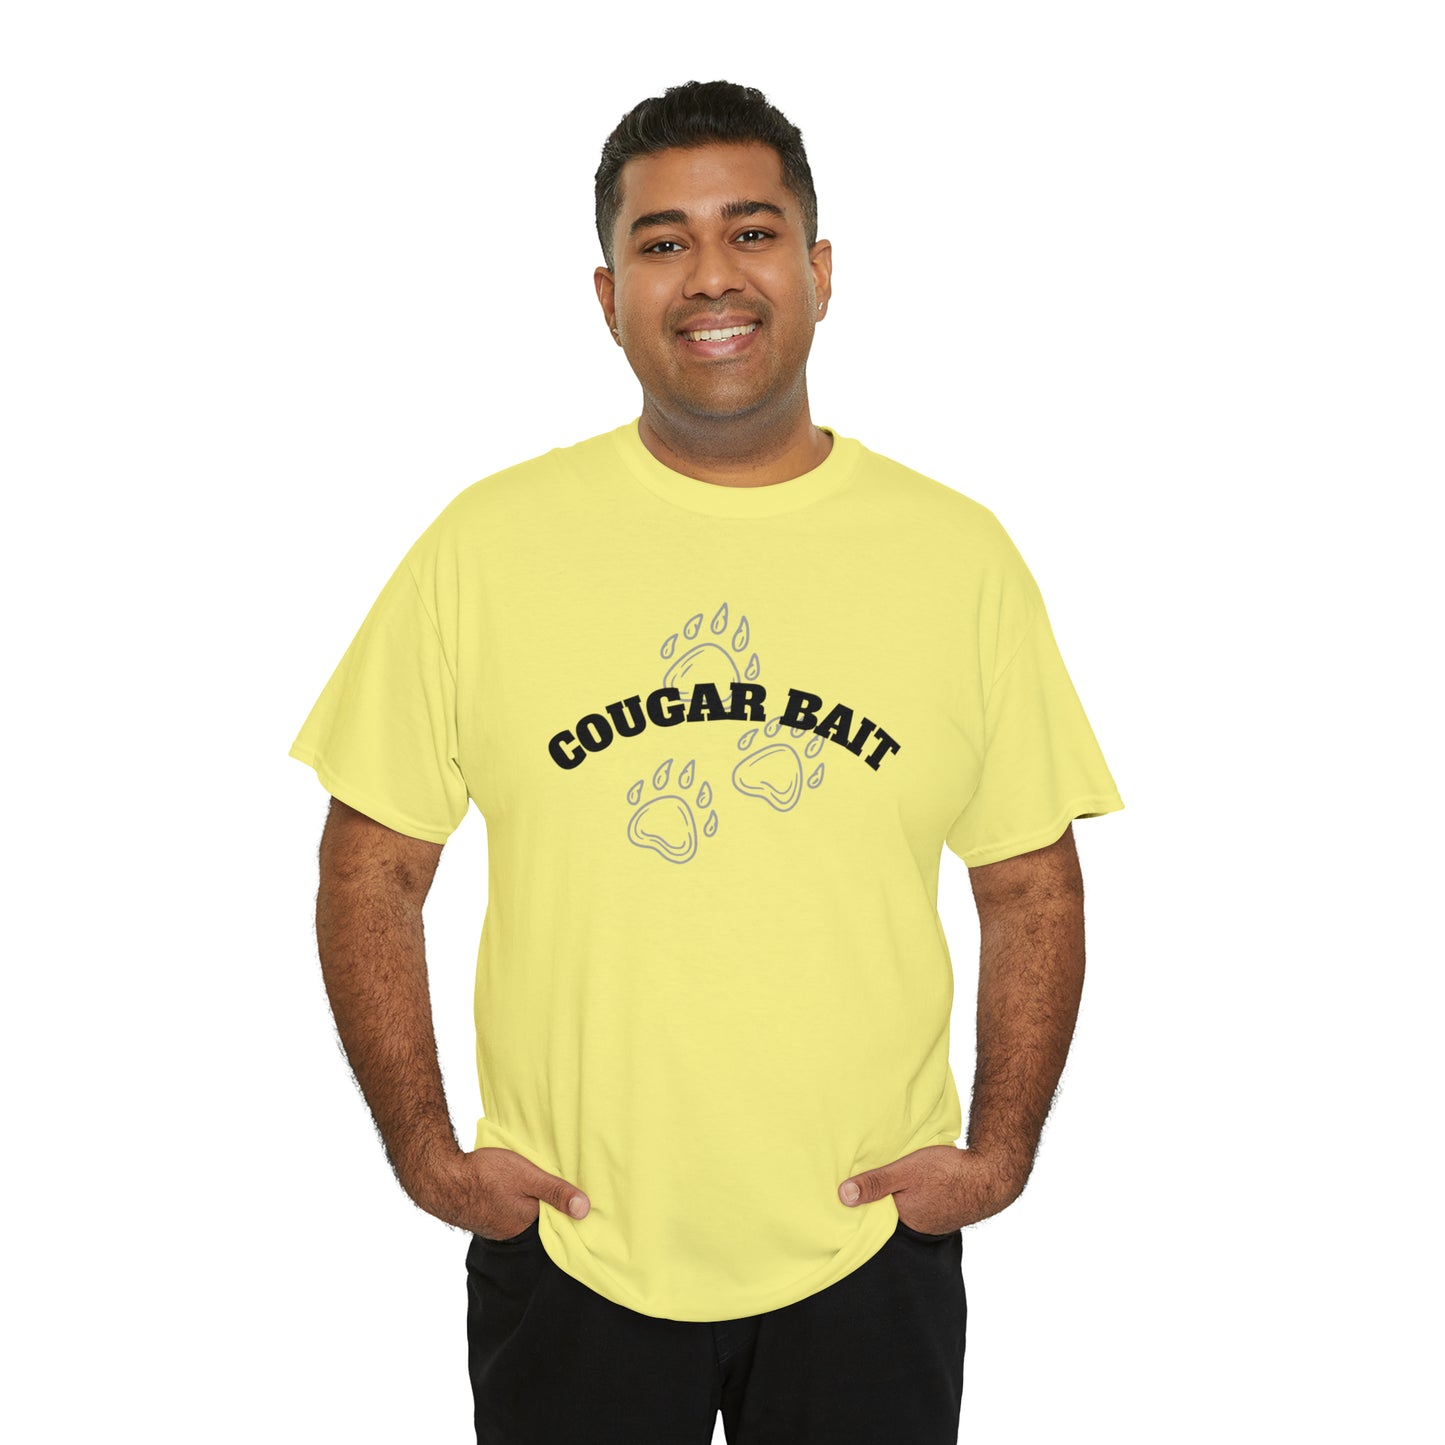 Unisex Heavy Cotton Tee - Cougar Bait with prints